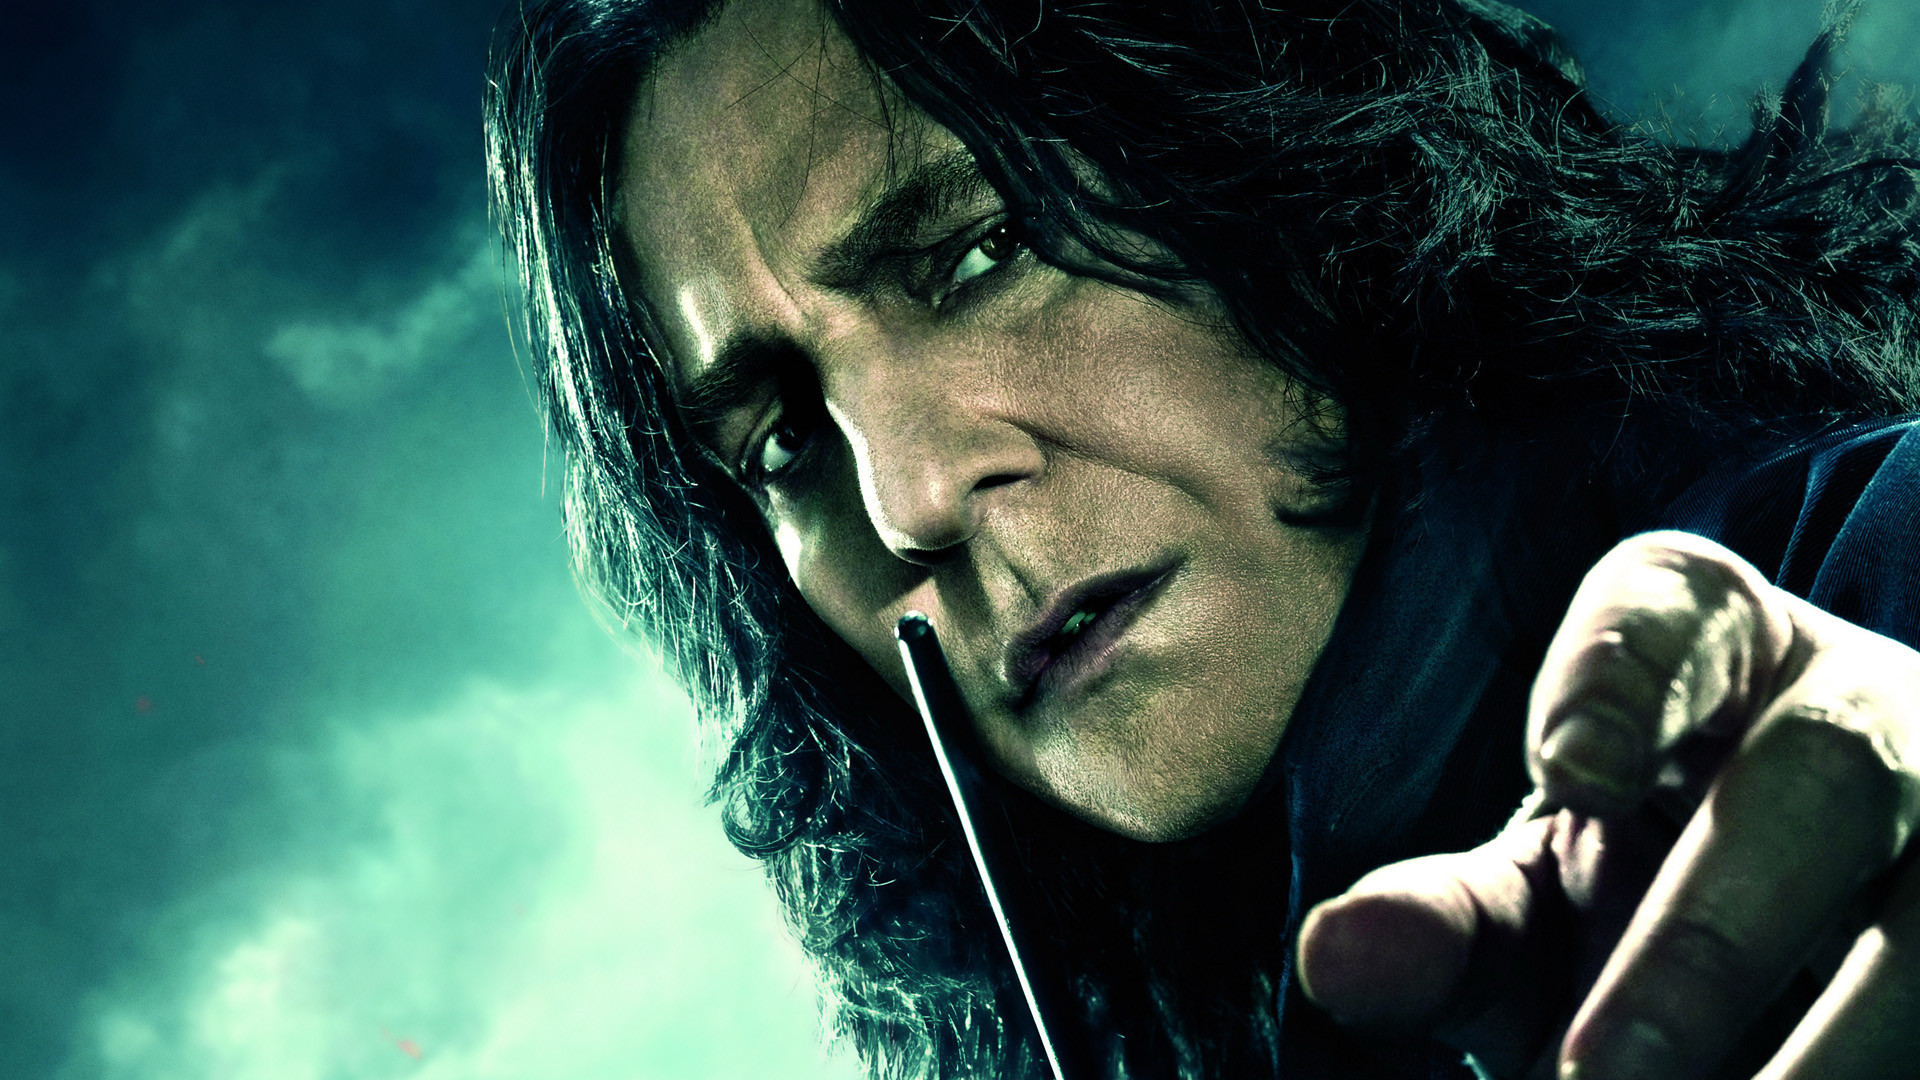 severus snape, harry potter, movie, harry potter and the deathly hallows: part 1, alan rickman